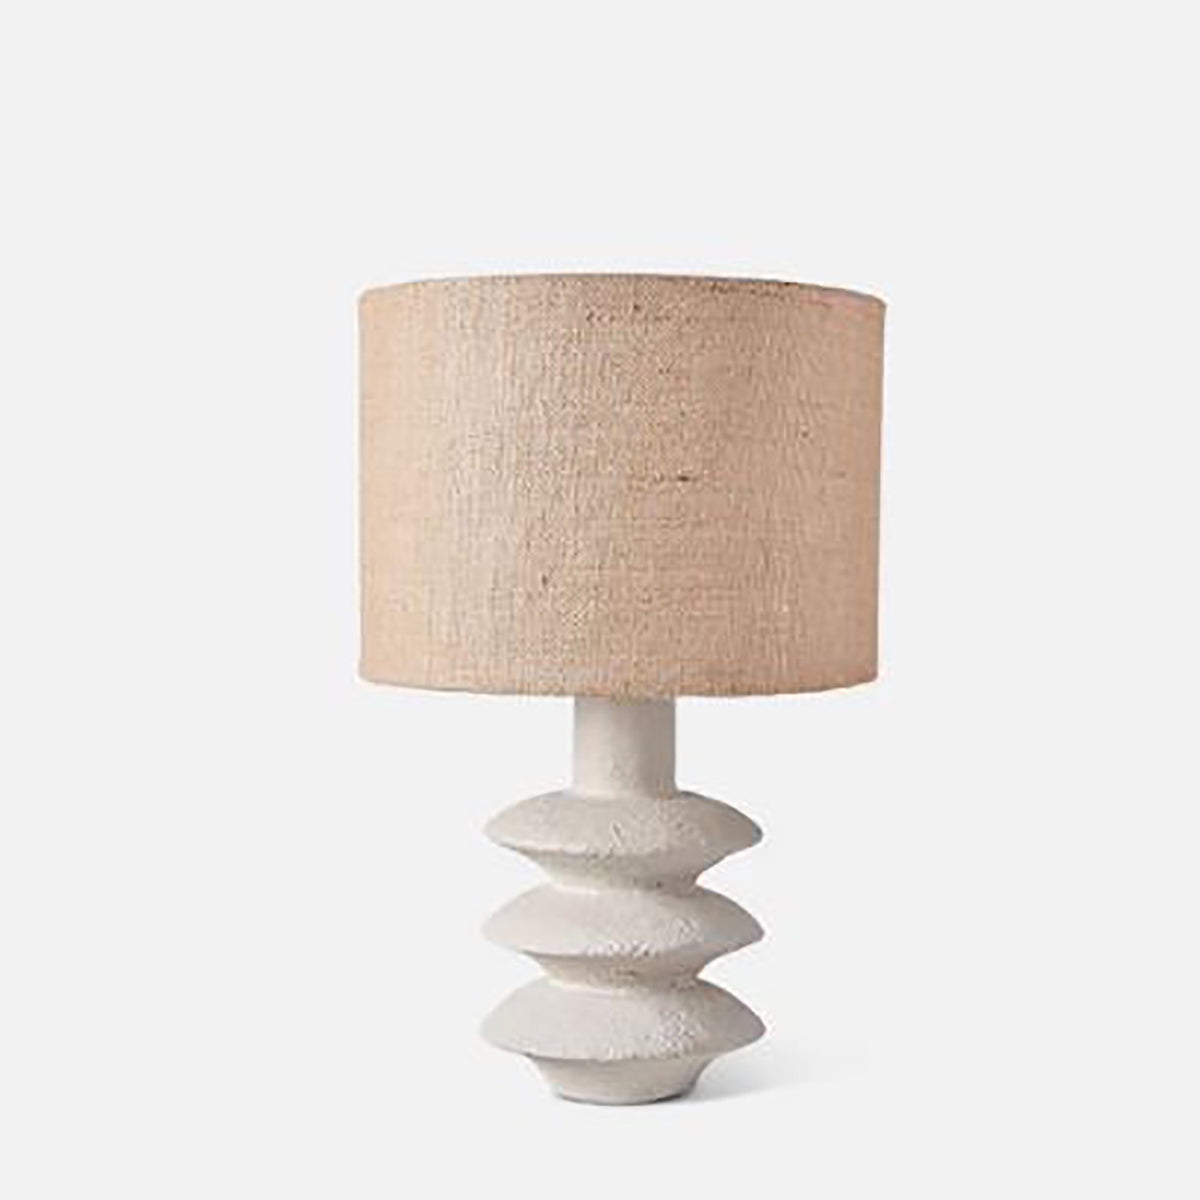 Sculptural 'Akito' Table Lamp with Jute Shade – The Deco Shop Ltd